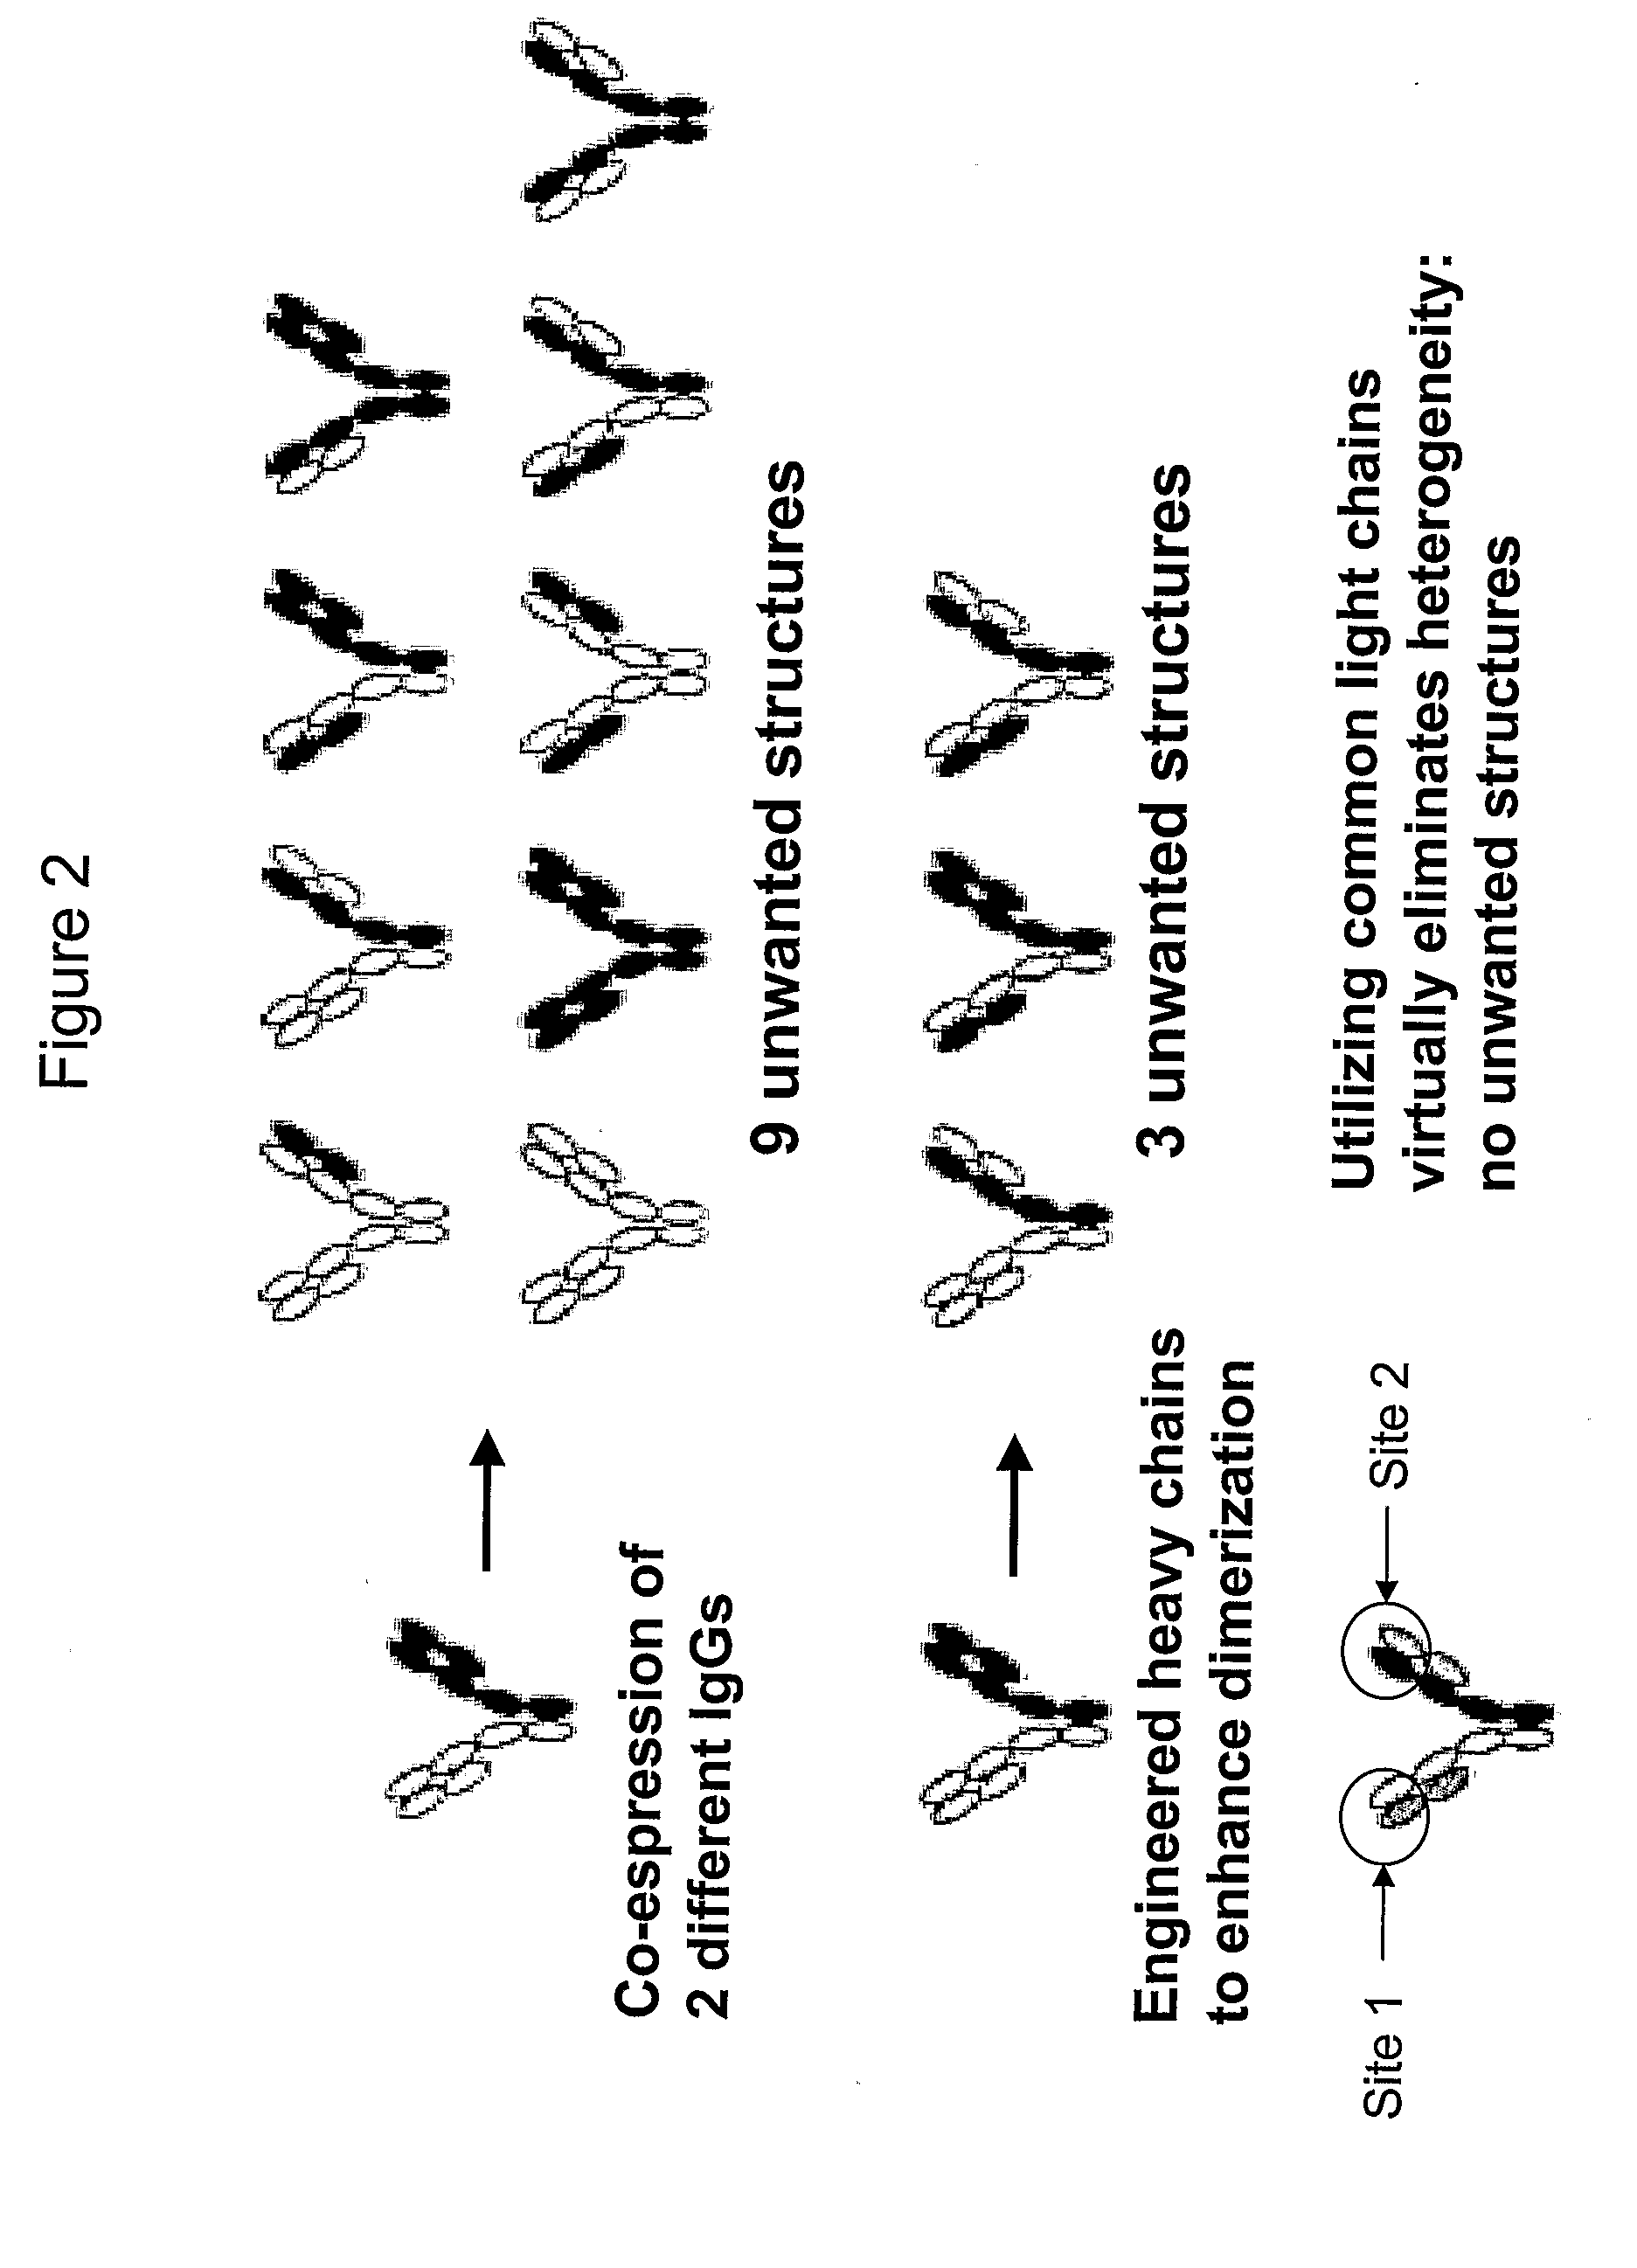 Methods of treating and preventing acute myocardial infarction